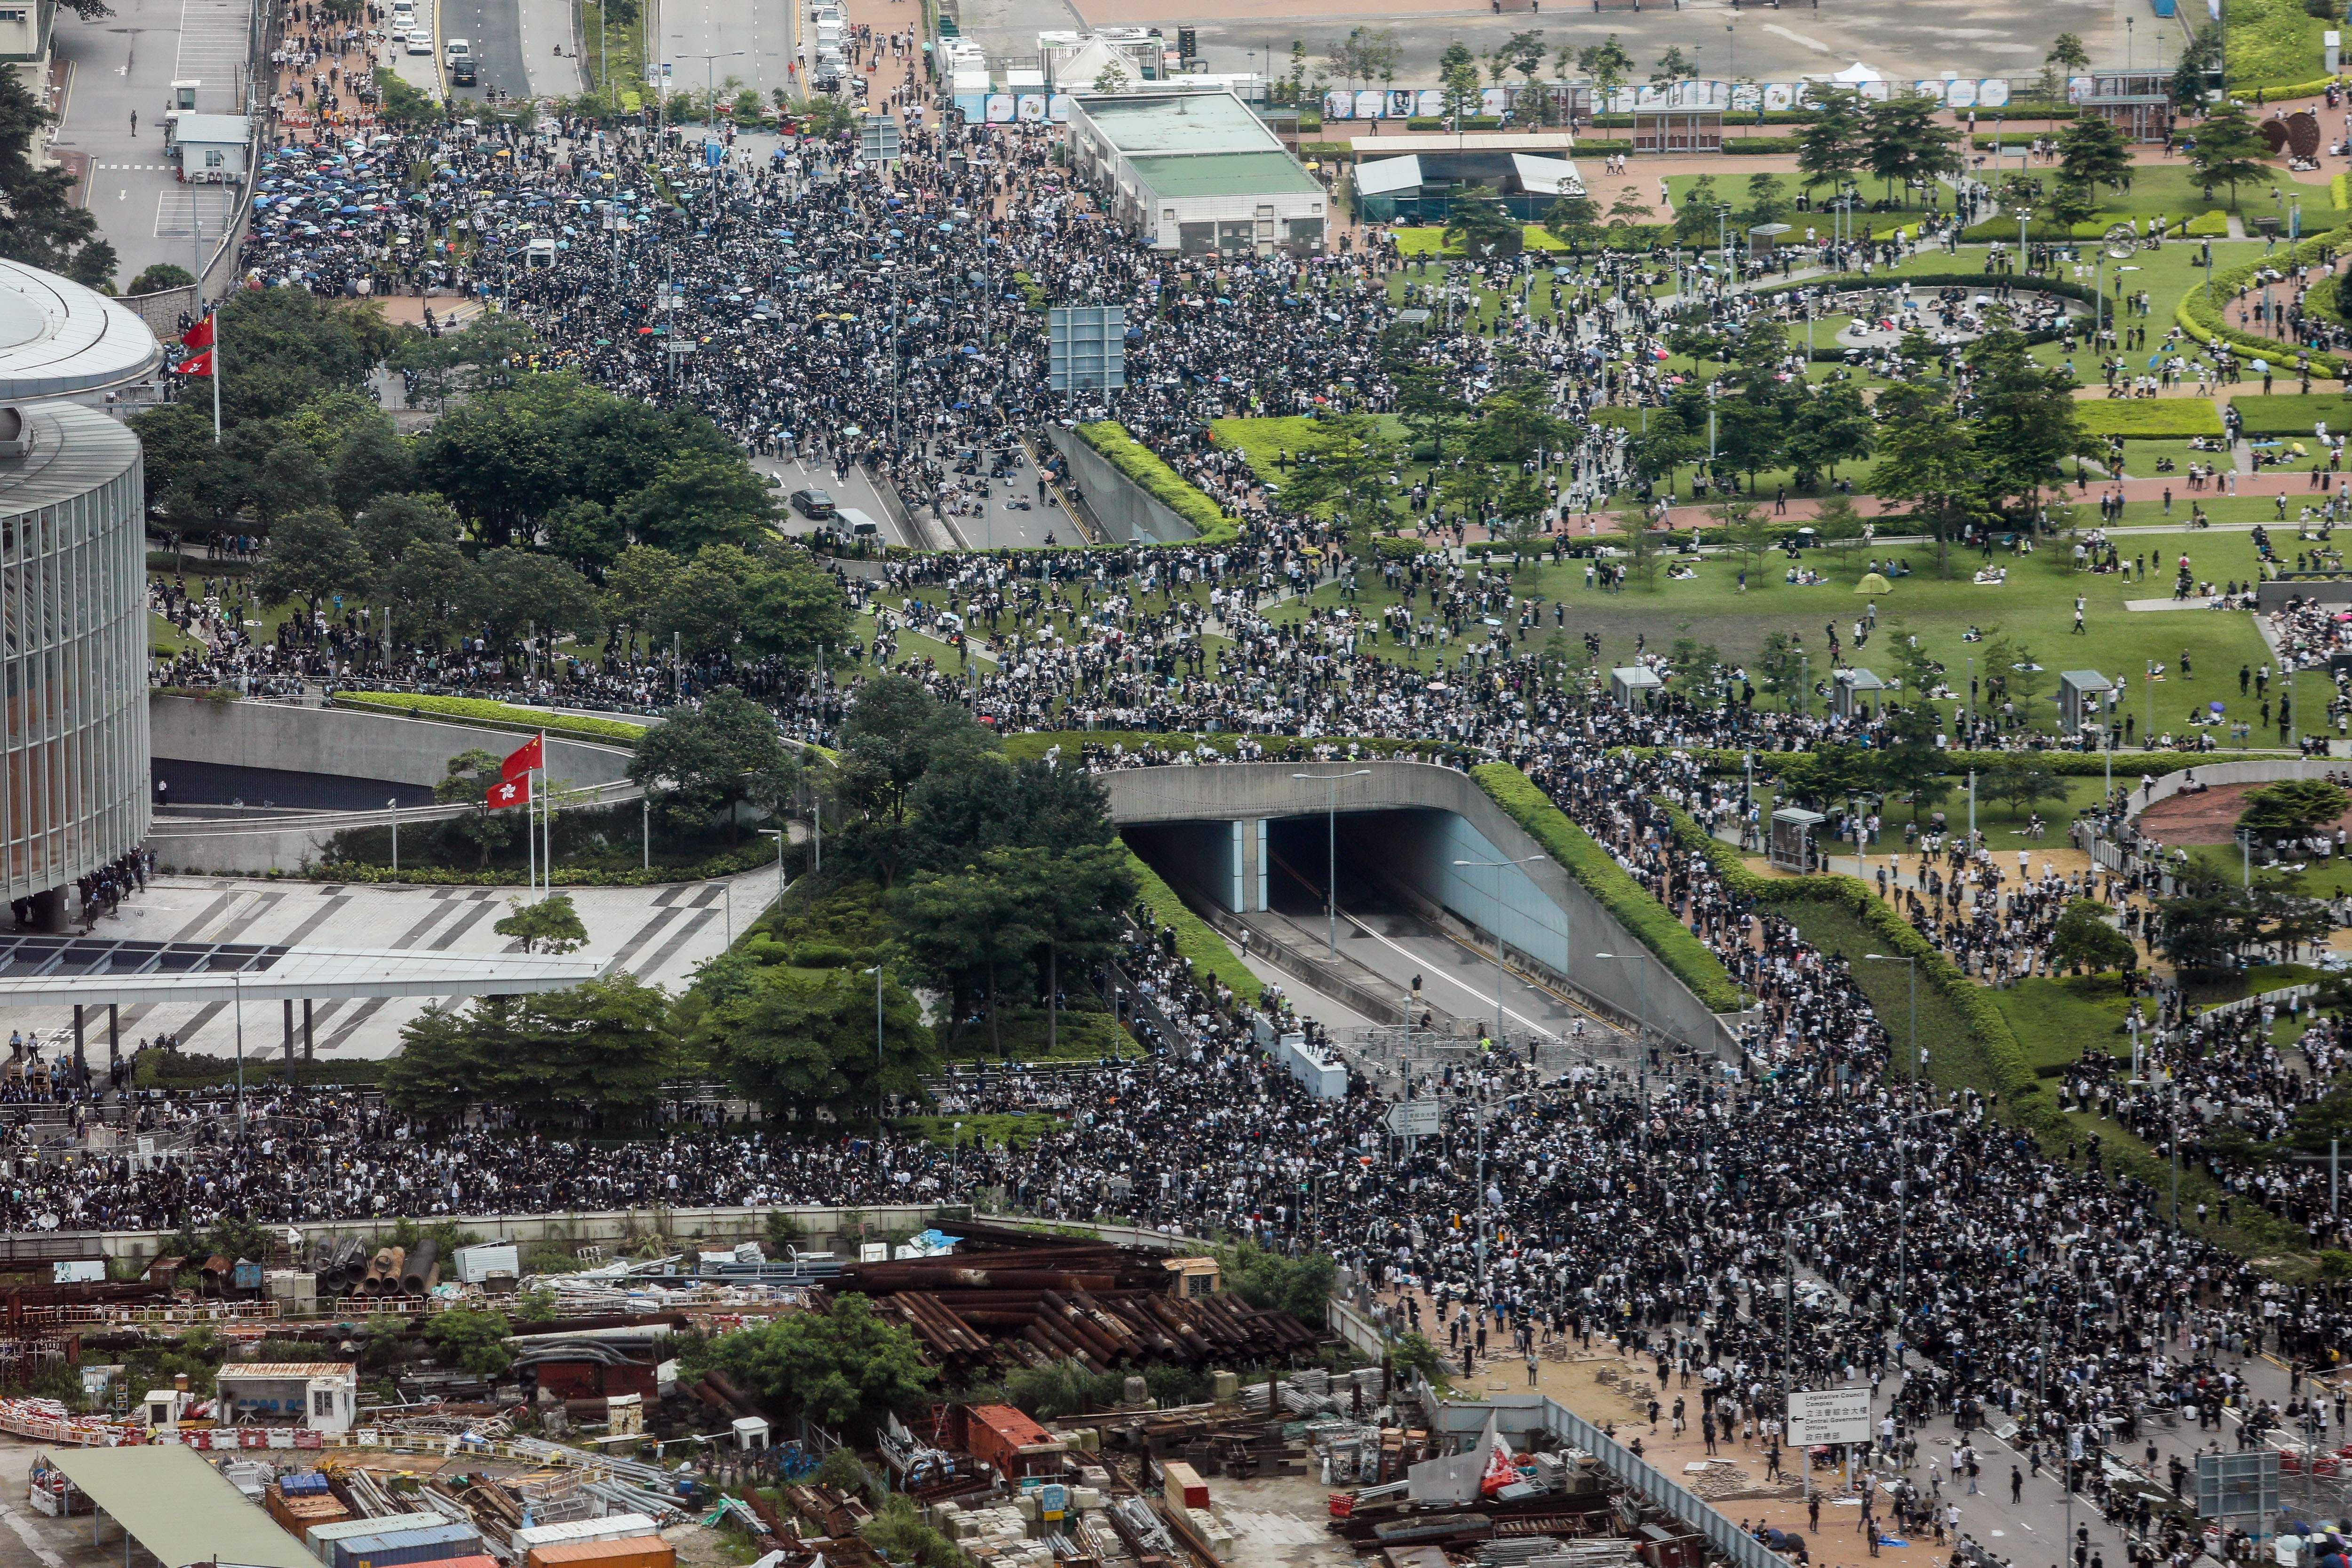 Protesters block roads during a rally outside the government headquarters in Hong Kong on June 12, 2019.